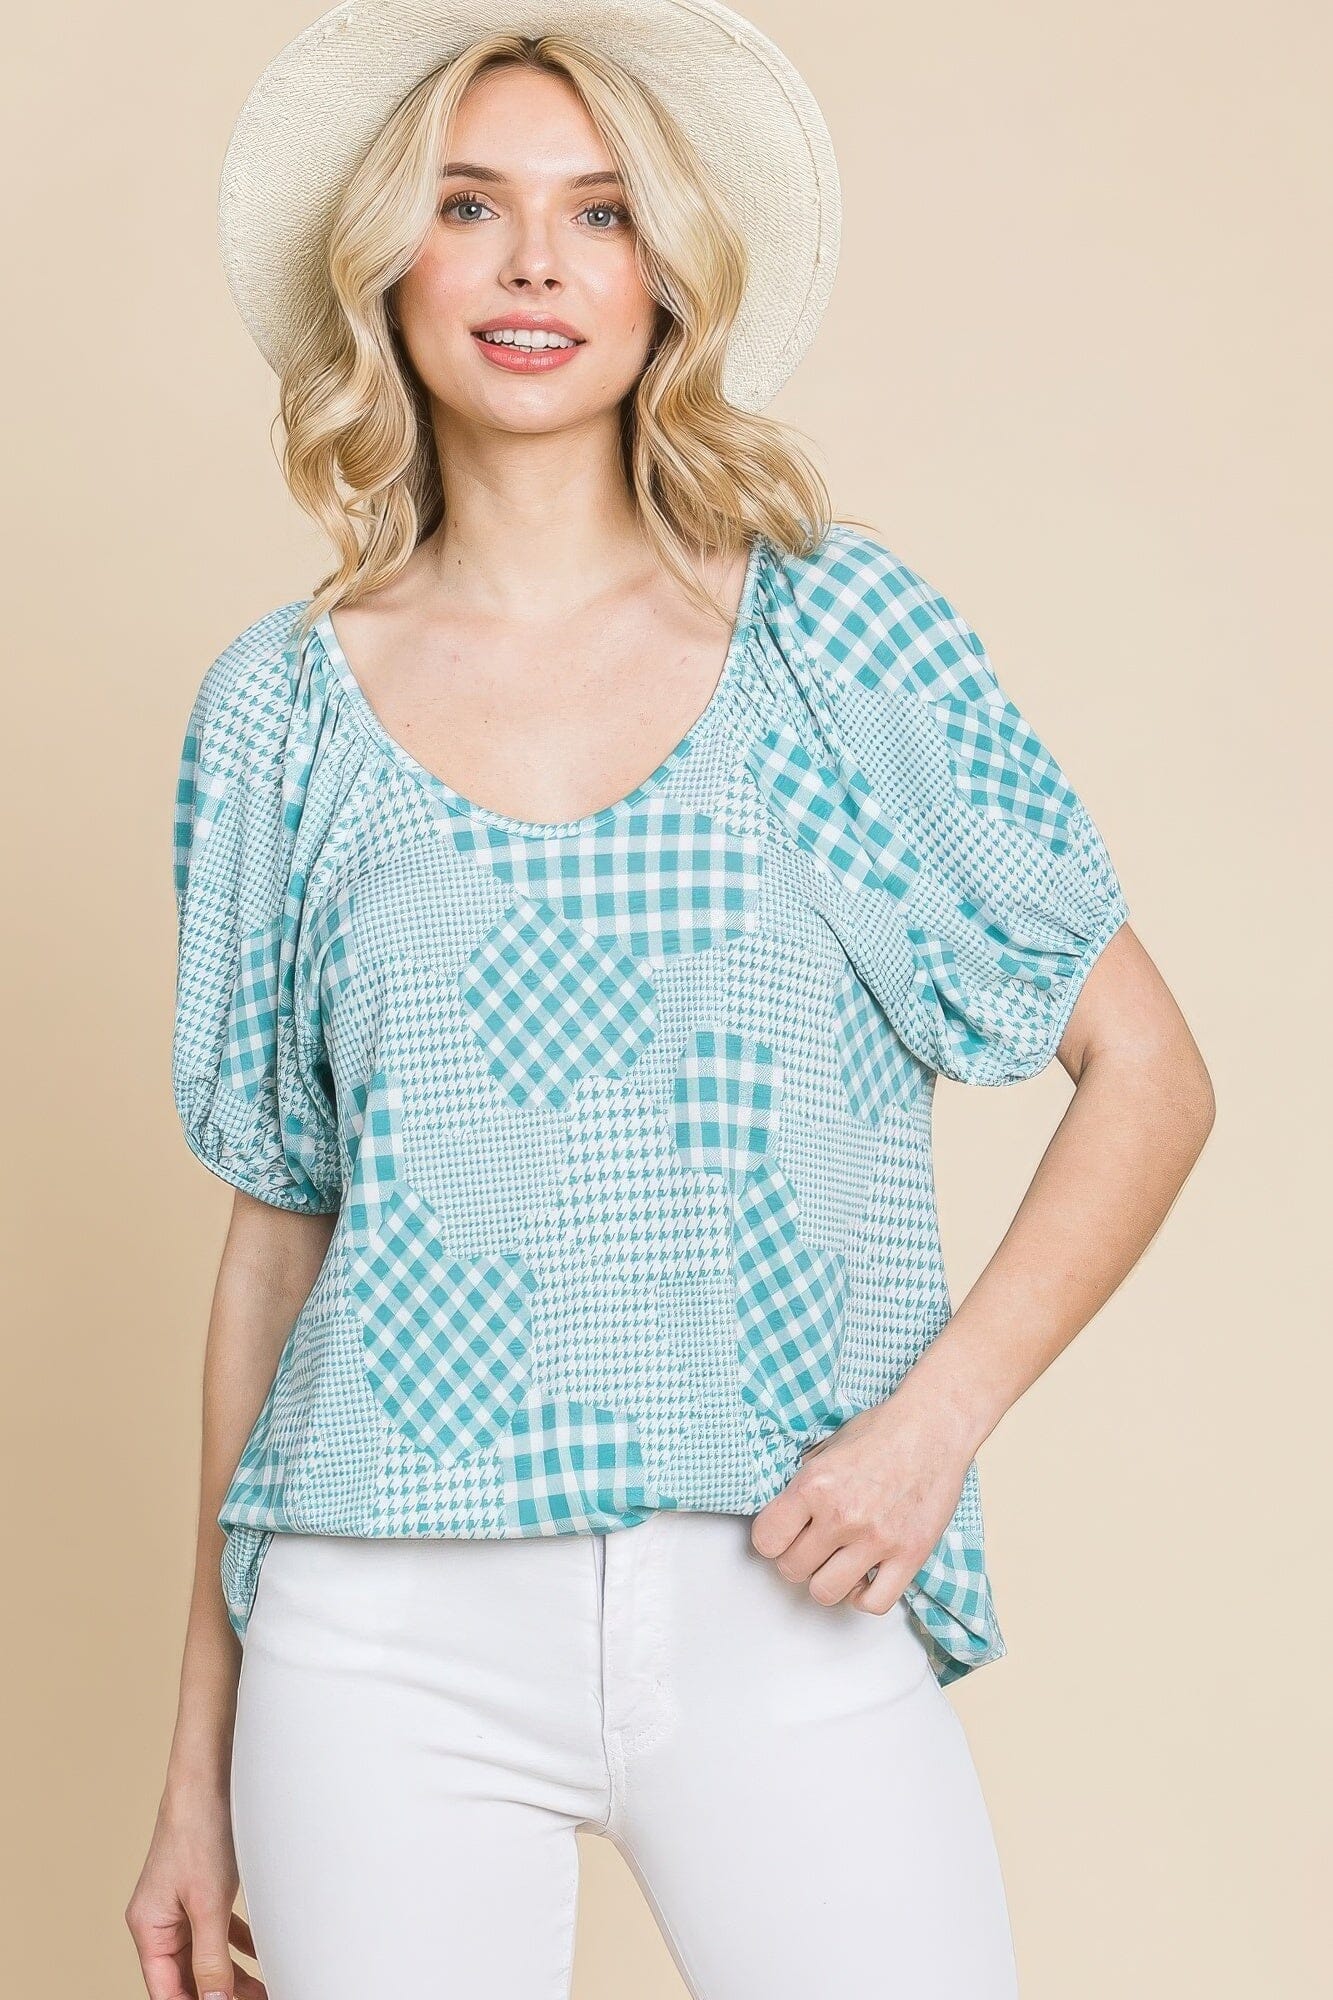 Sage Blue Check Plaid Short Bubble Sleeves Round Neck Top Shirts & Tops jehouze 